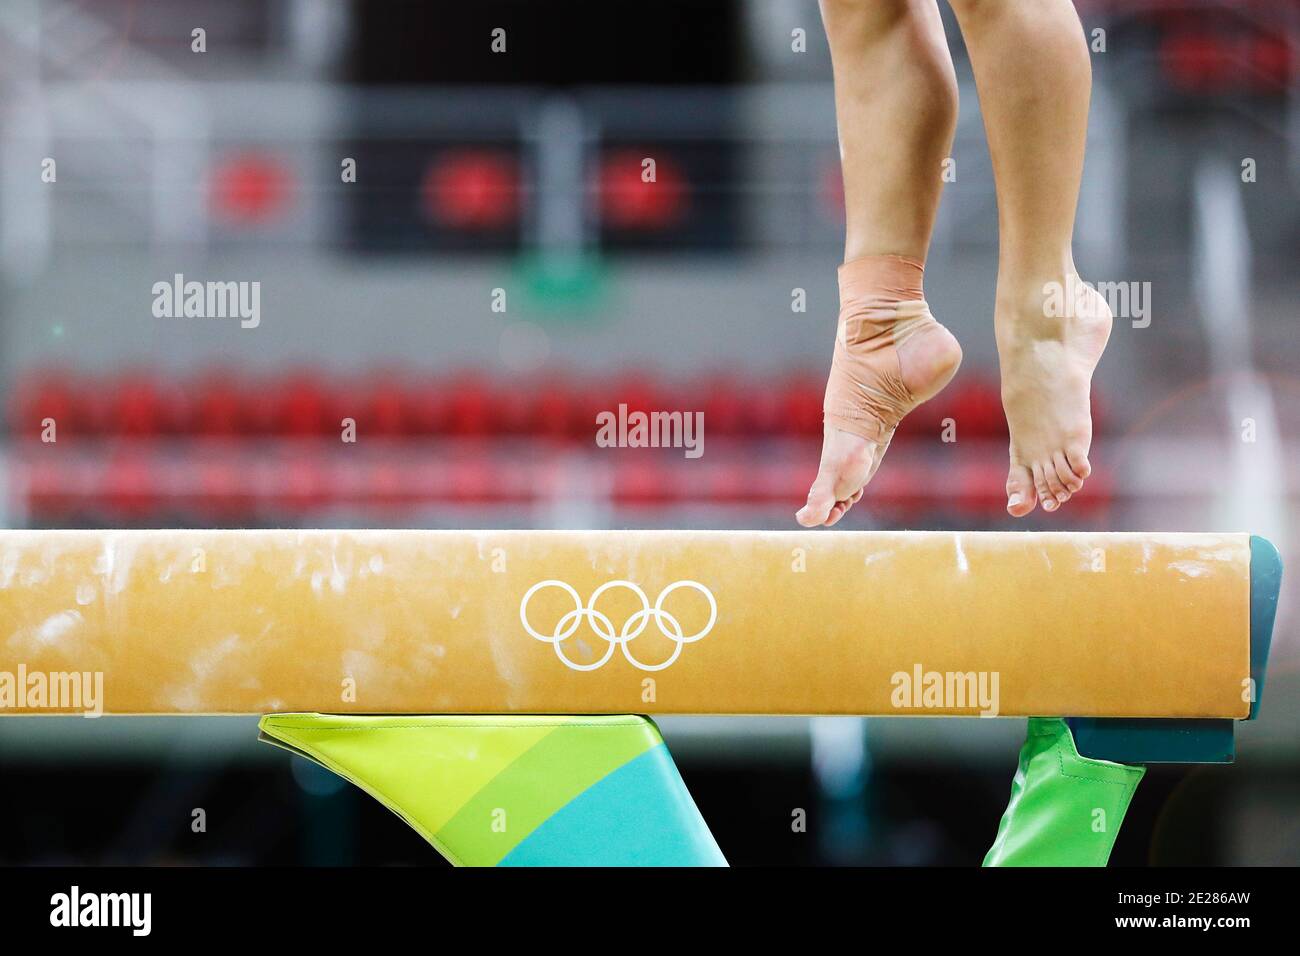 Balance beam artistic gymnastics competition performance. Close up detail of woman athlete feet on air, jump training session exercise indoors Stock Photo